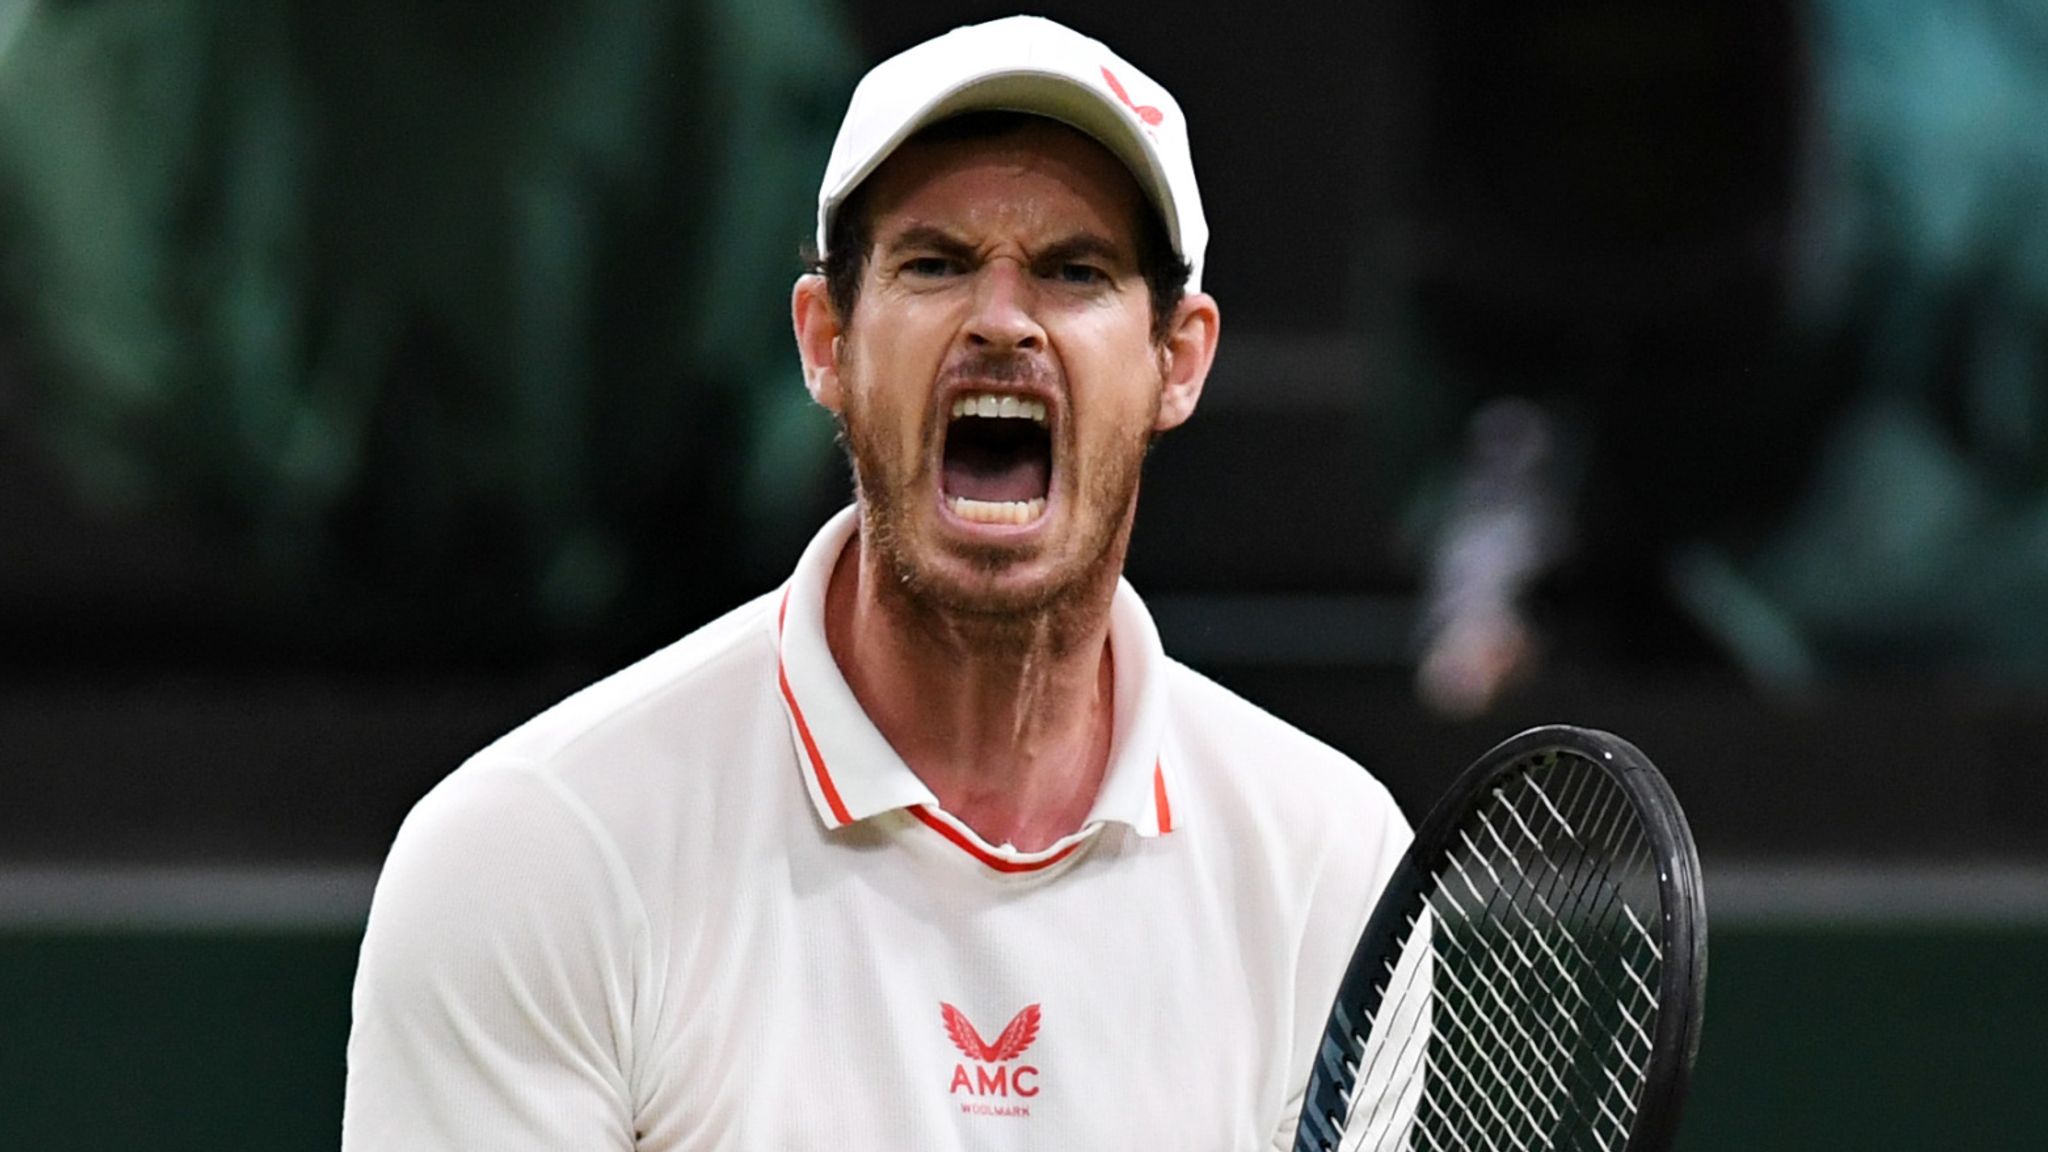 Wimbledon 2021 Andy Murray continues run with vintage five-set comeback win over Oscar Otte Tennis News Sky Sports